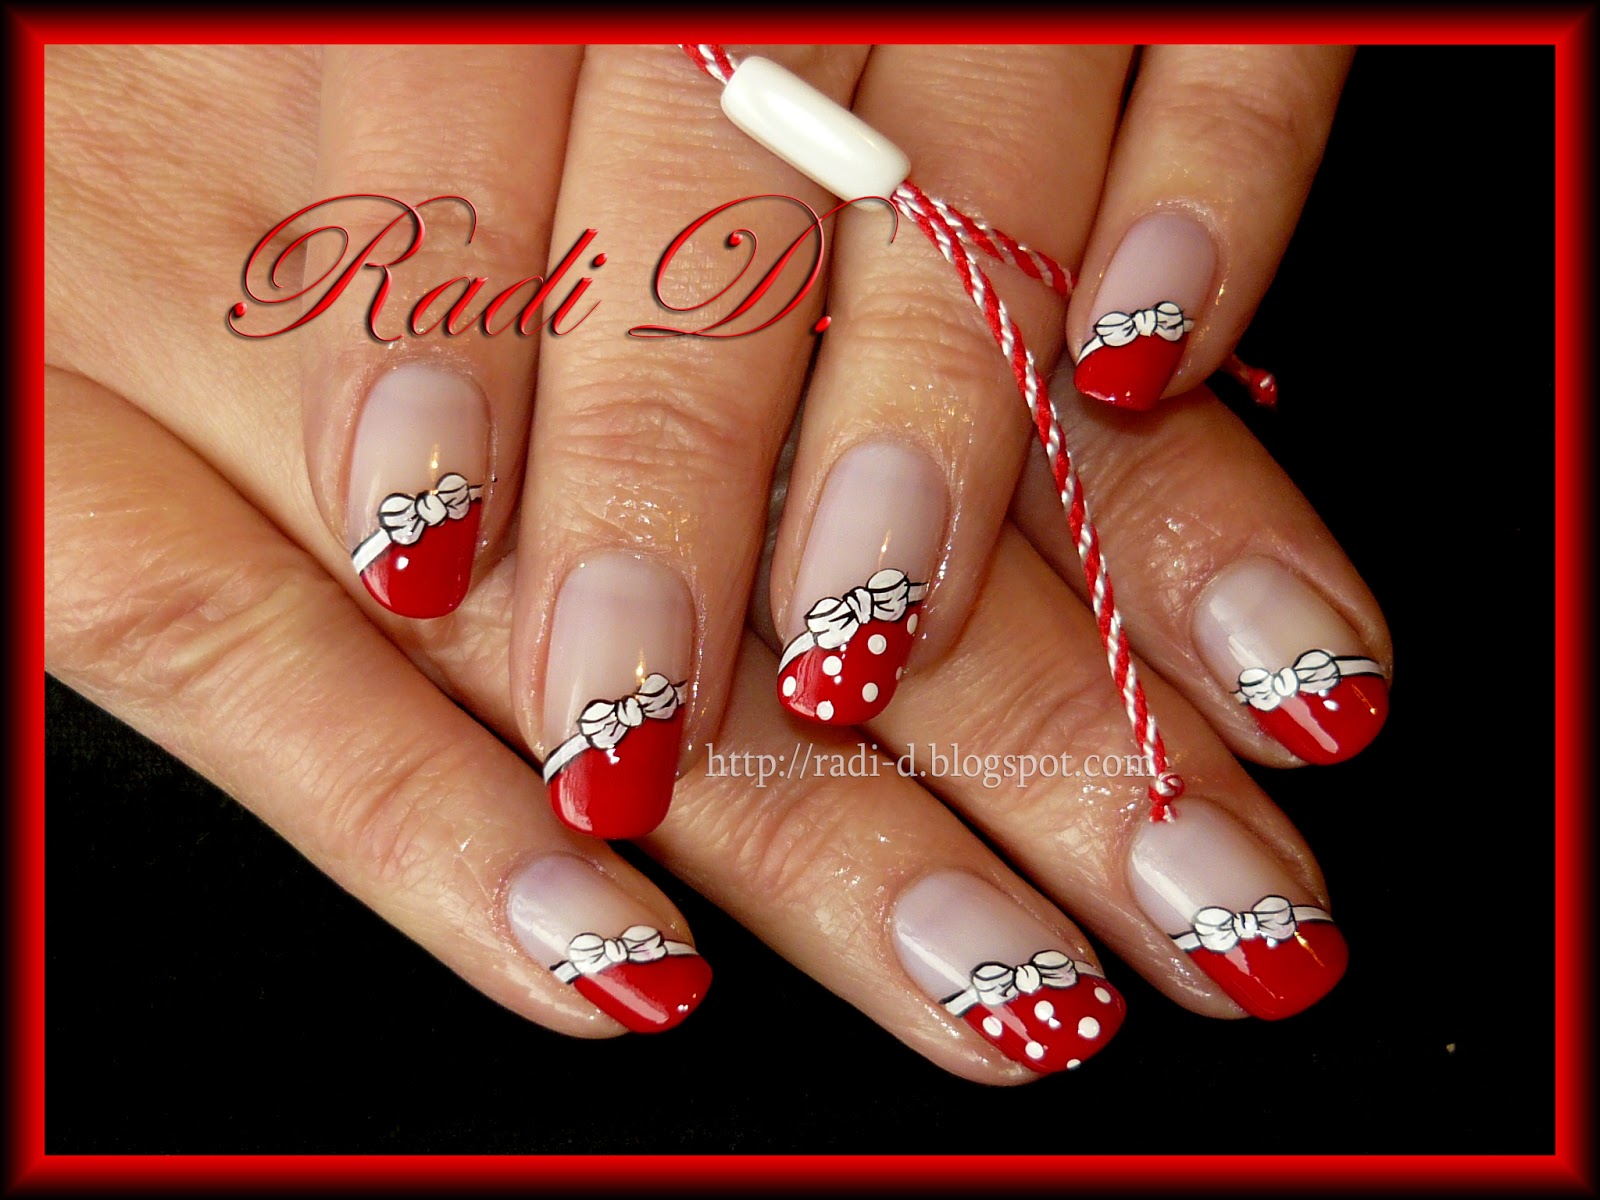 Red and White Nail Art Designs - wide 5